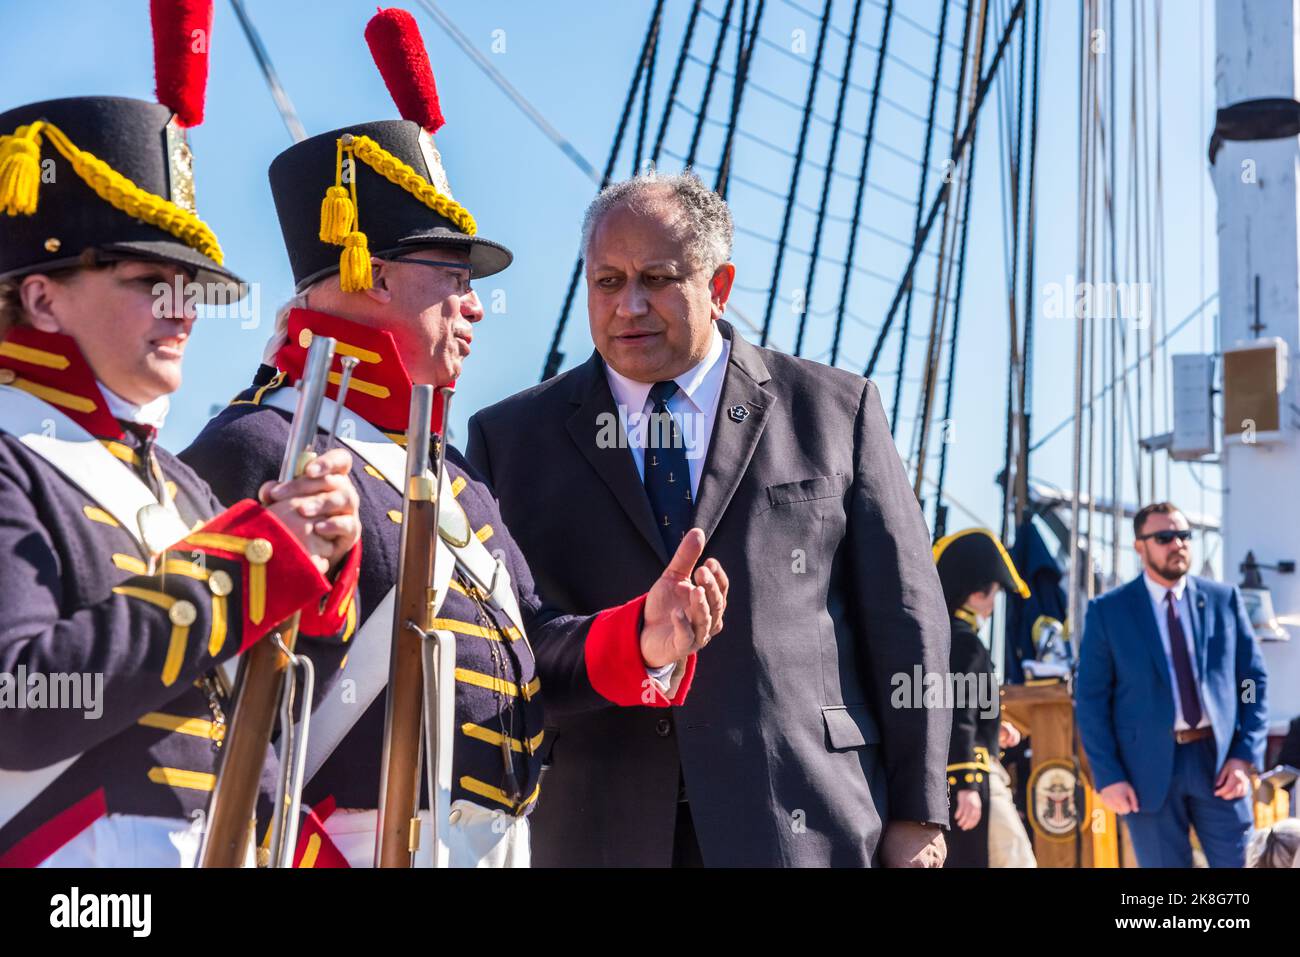 USS Constitution went underway from Charlestown Navy Yard for the 225th birthday celebration. Stock Photo